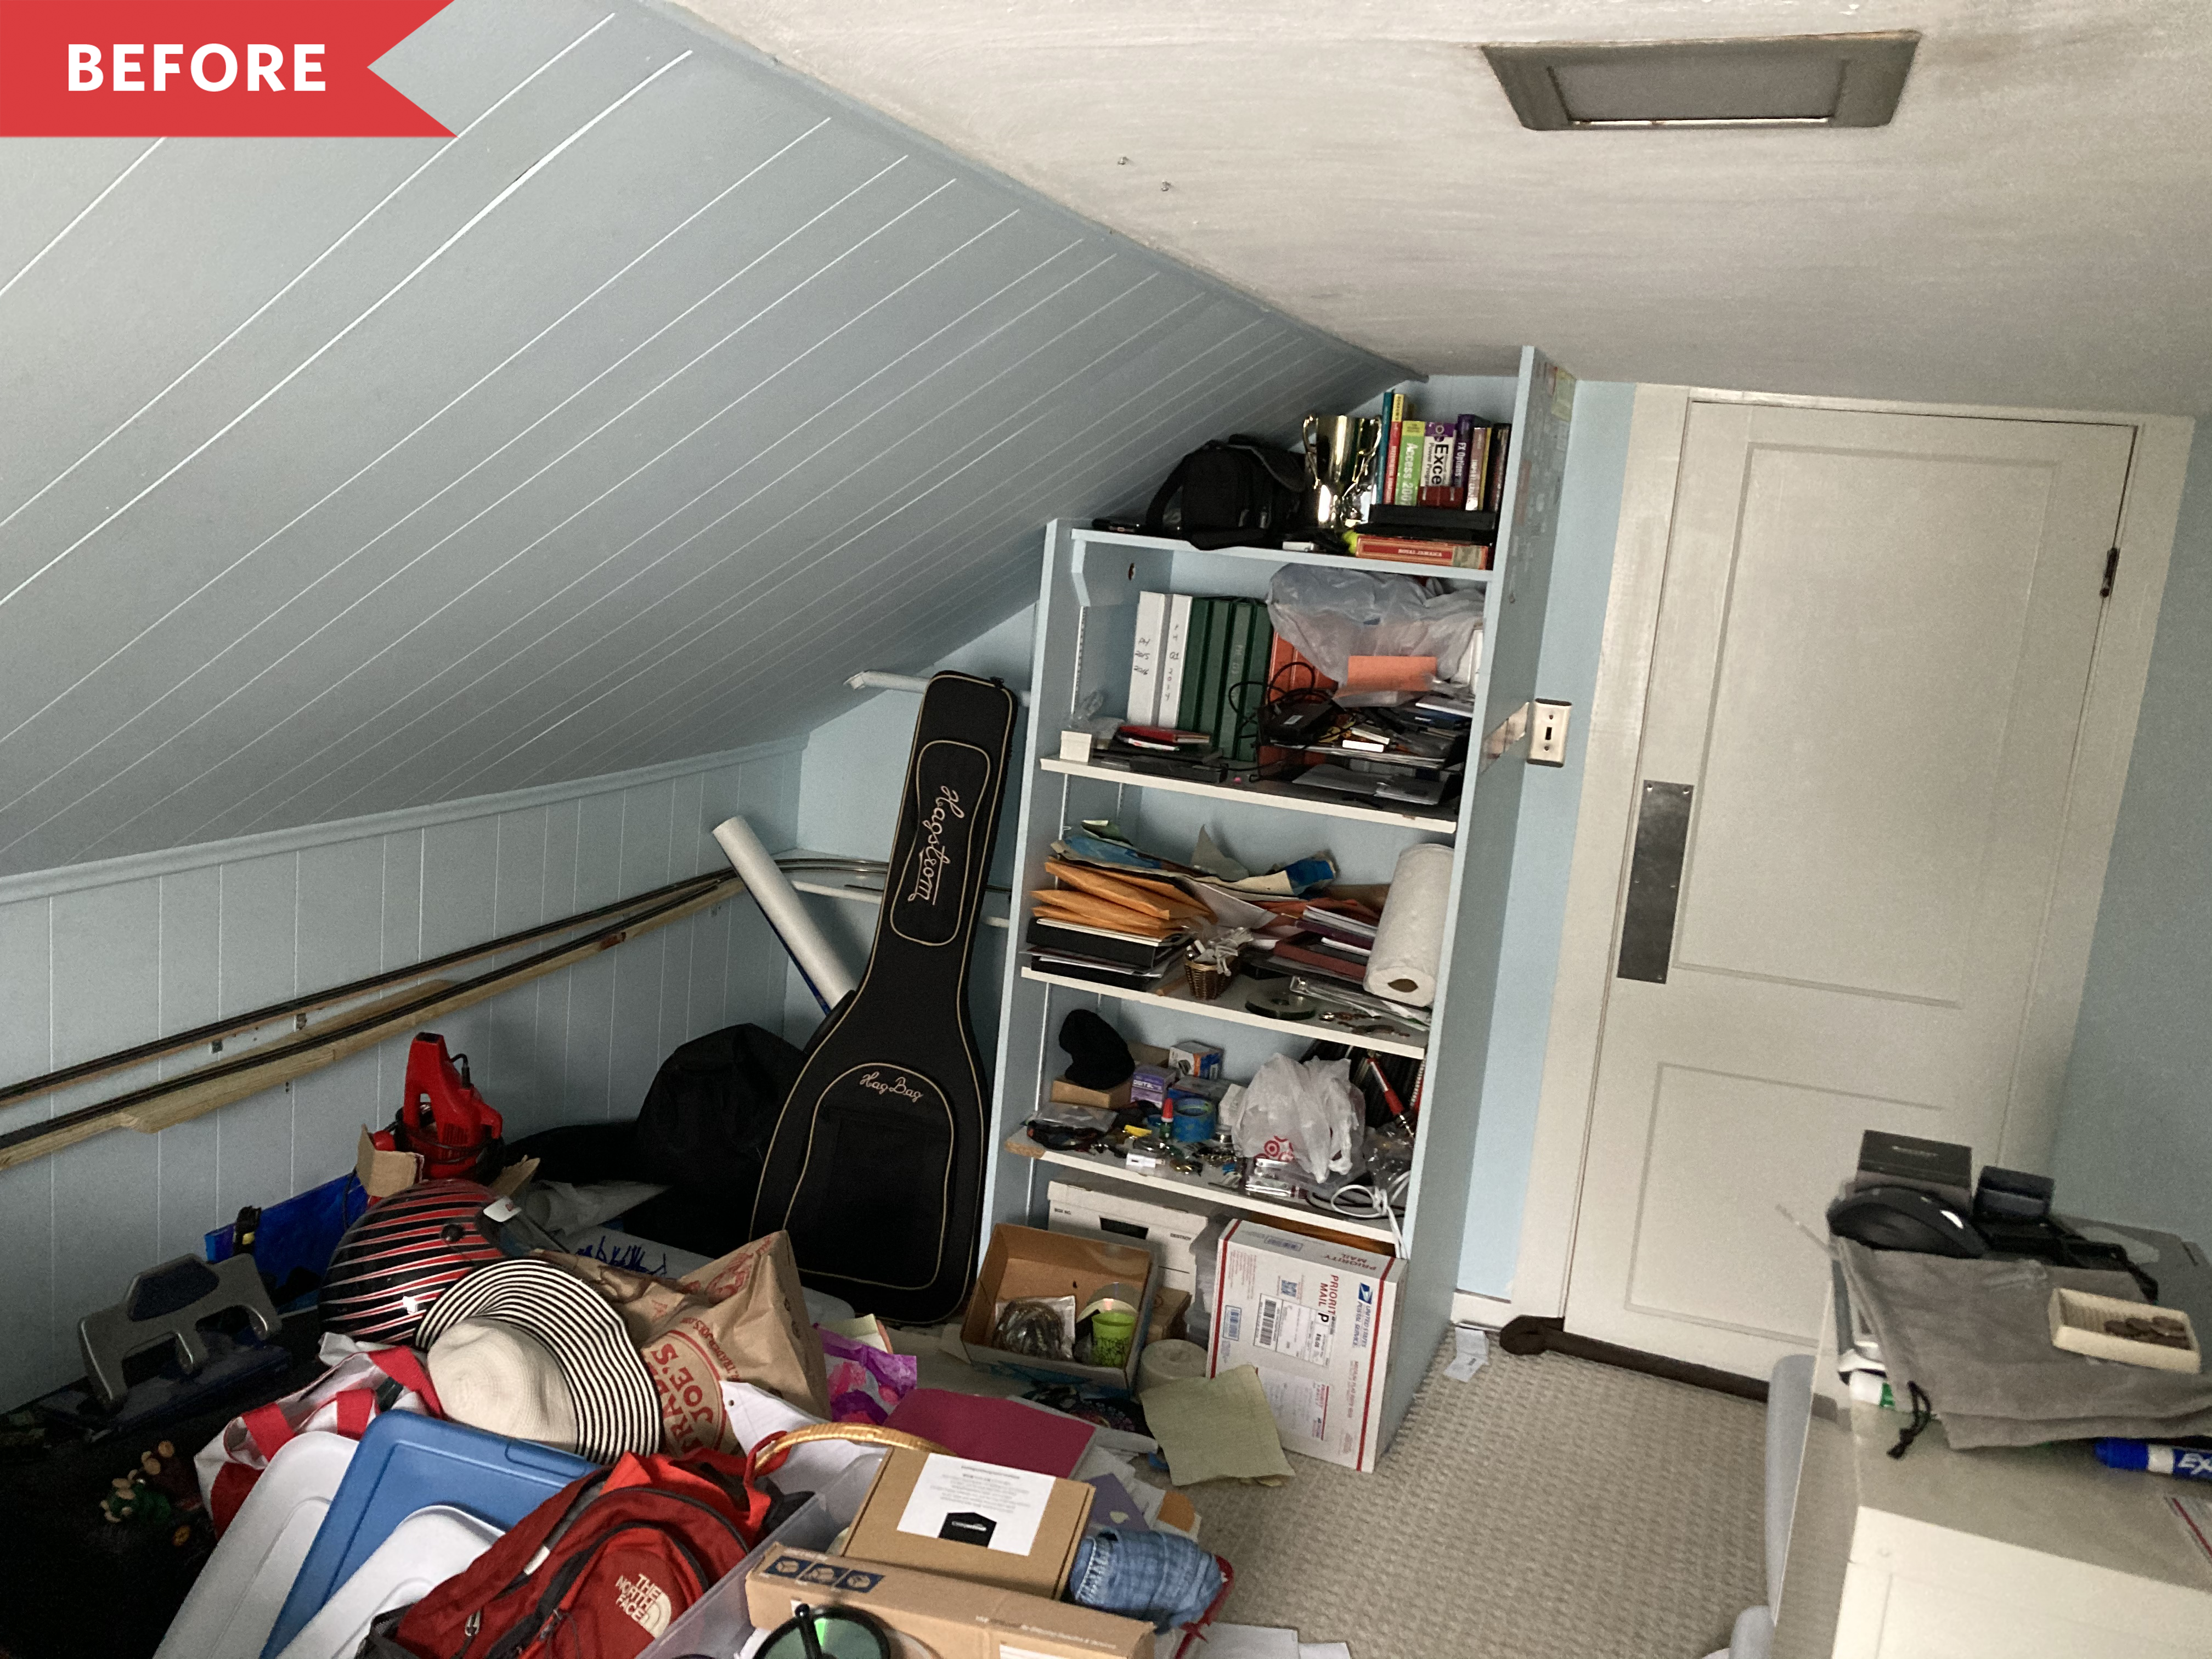 Is clutter OK? How the pandemic changed home organization